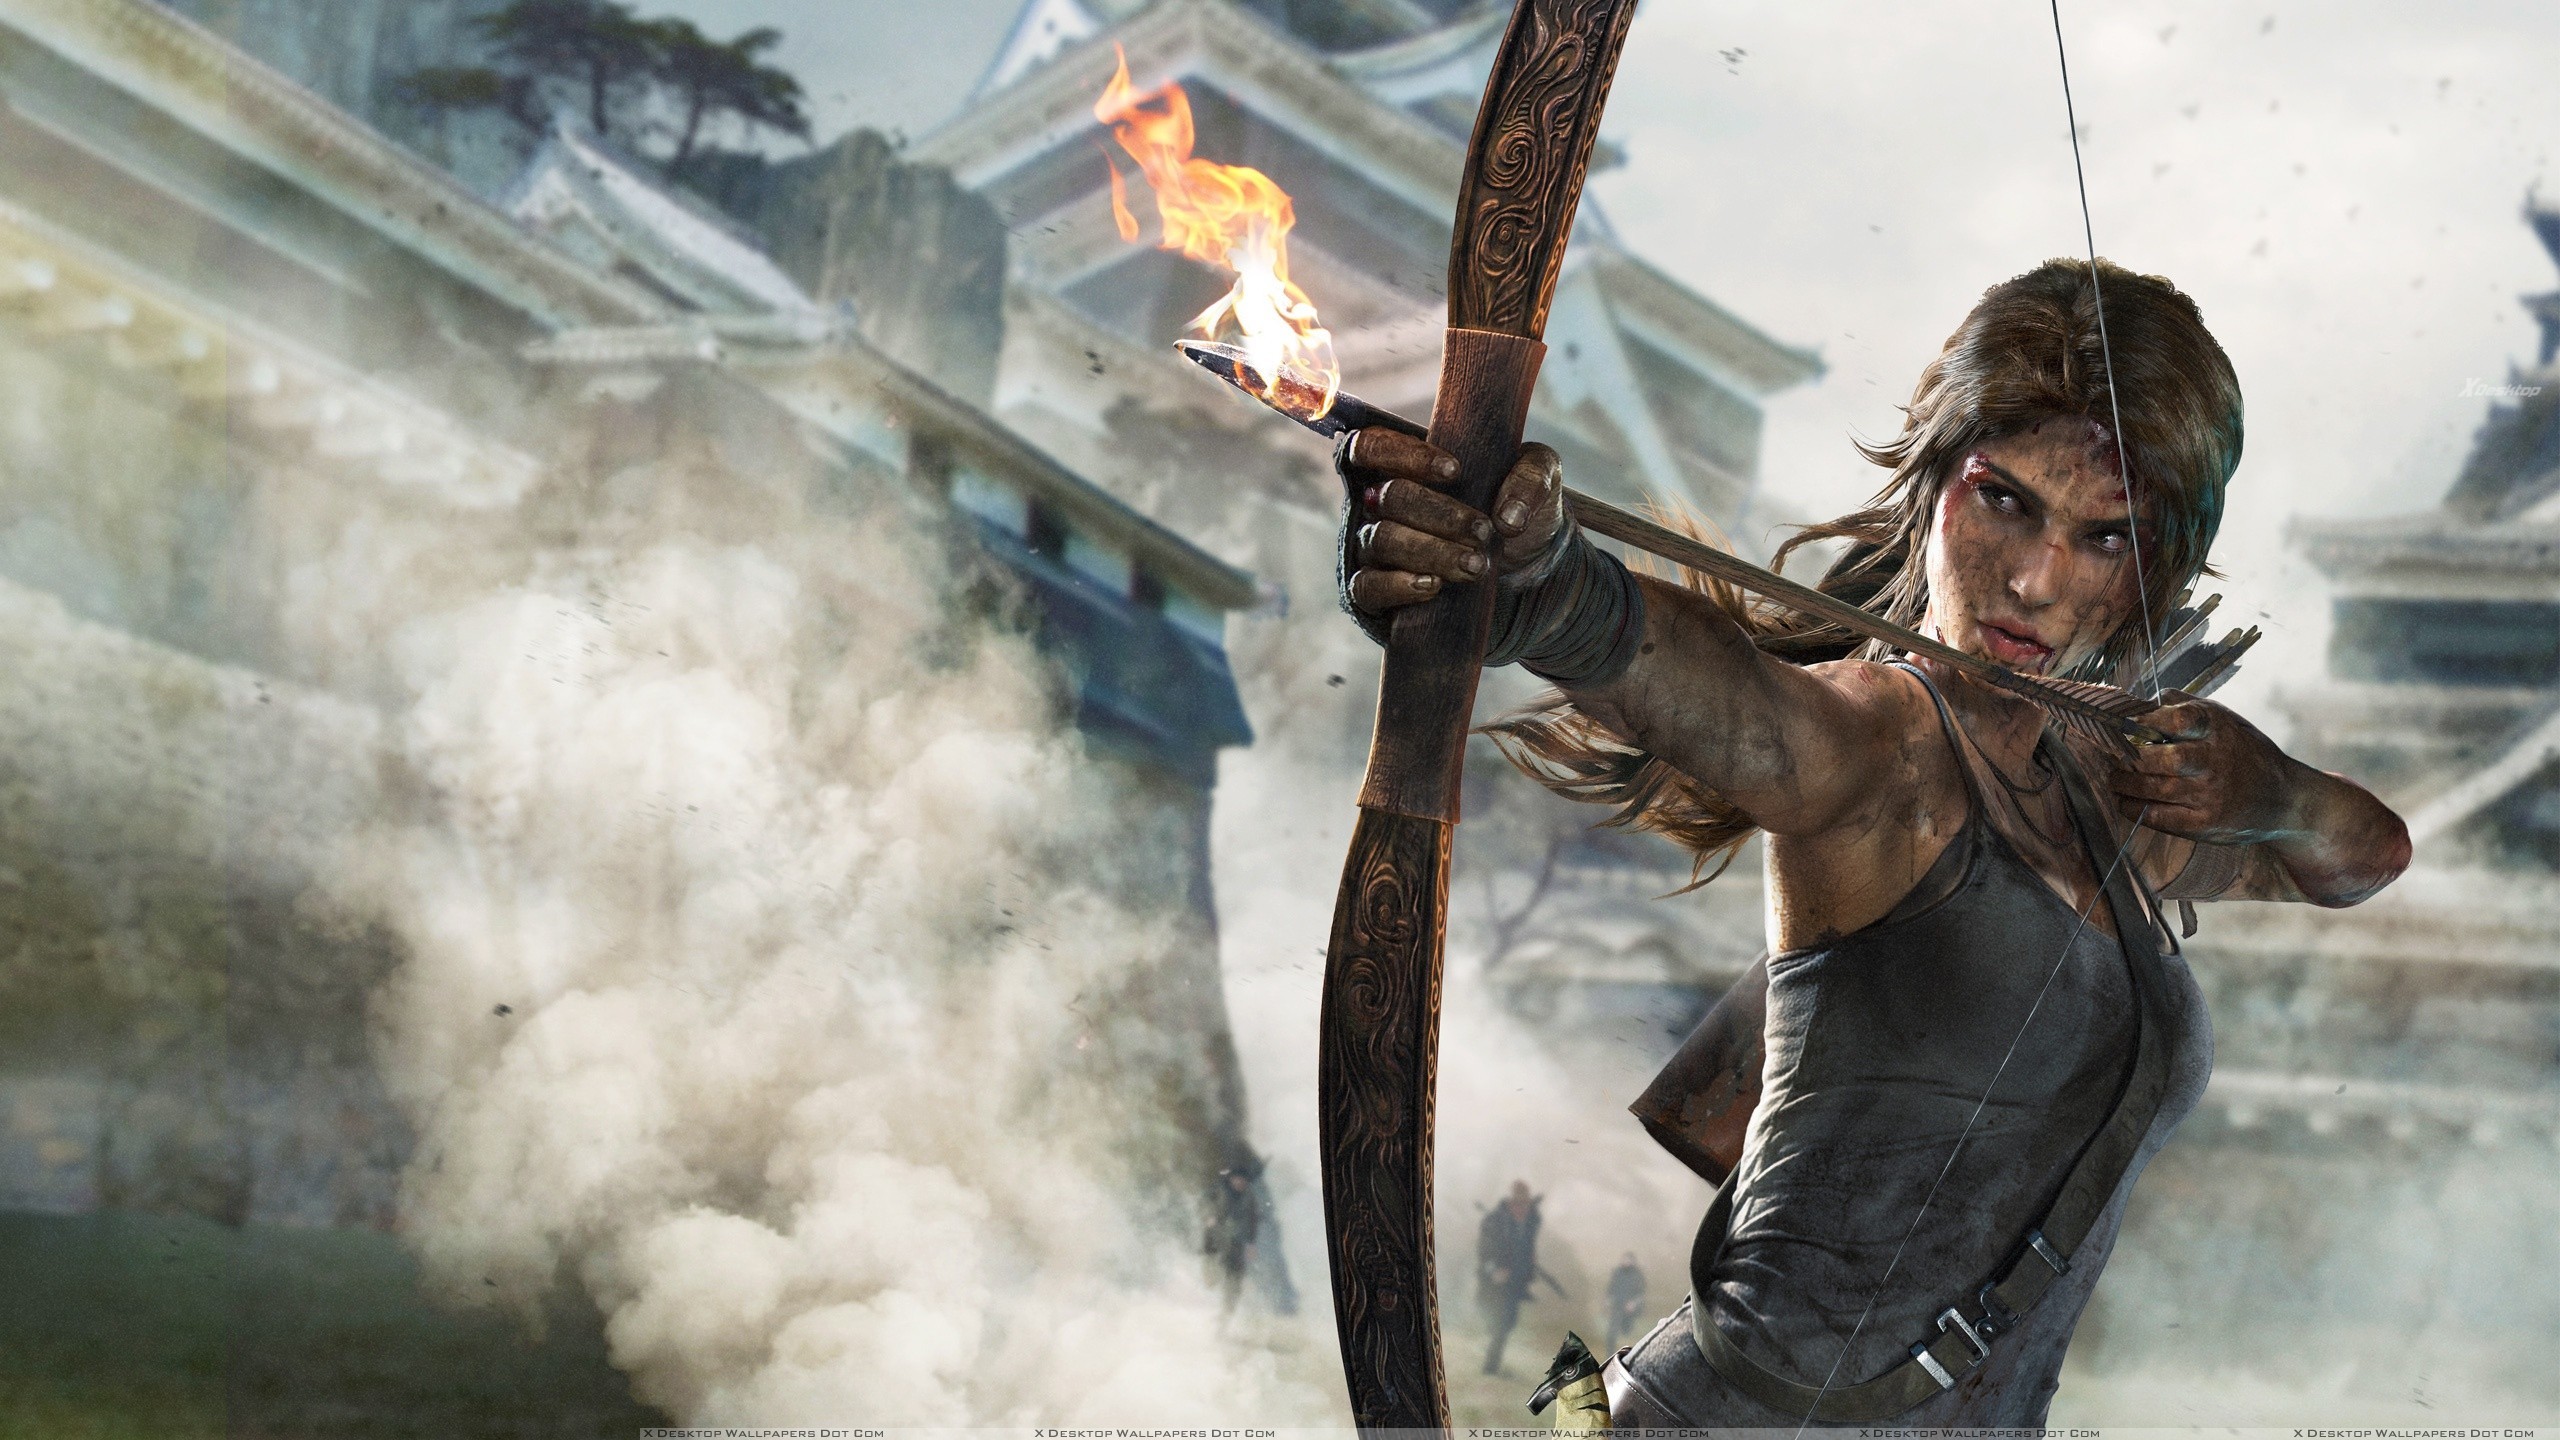 2560x1440 http://xdesktopwallpapers.com/wp-content/uploads/2014/01/Lara-Croft-With-A-Bow-Angry-Face-In- Tomb-Raider.jpg | Lara Croft Reference | Pinterest | Tomb ...